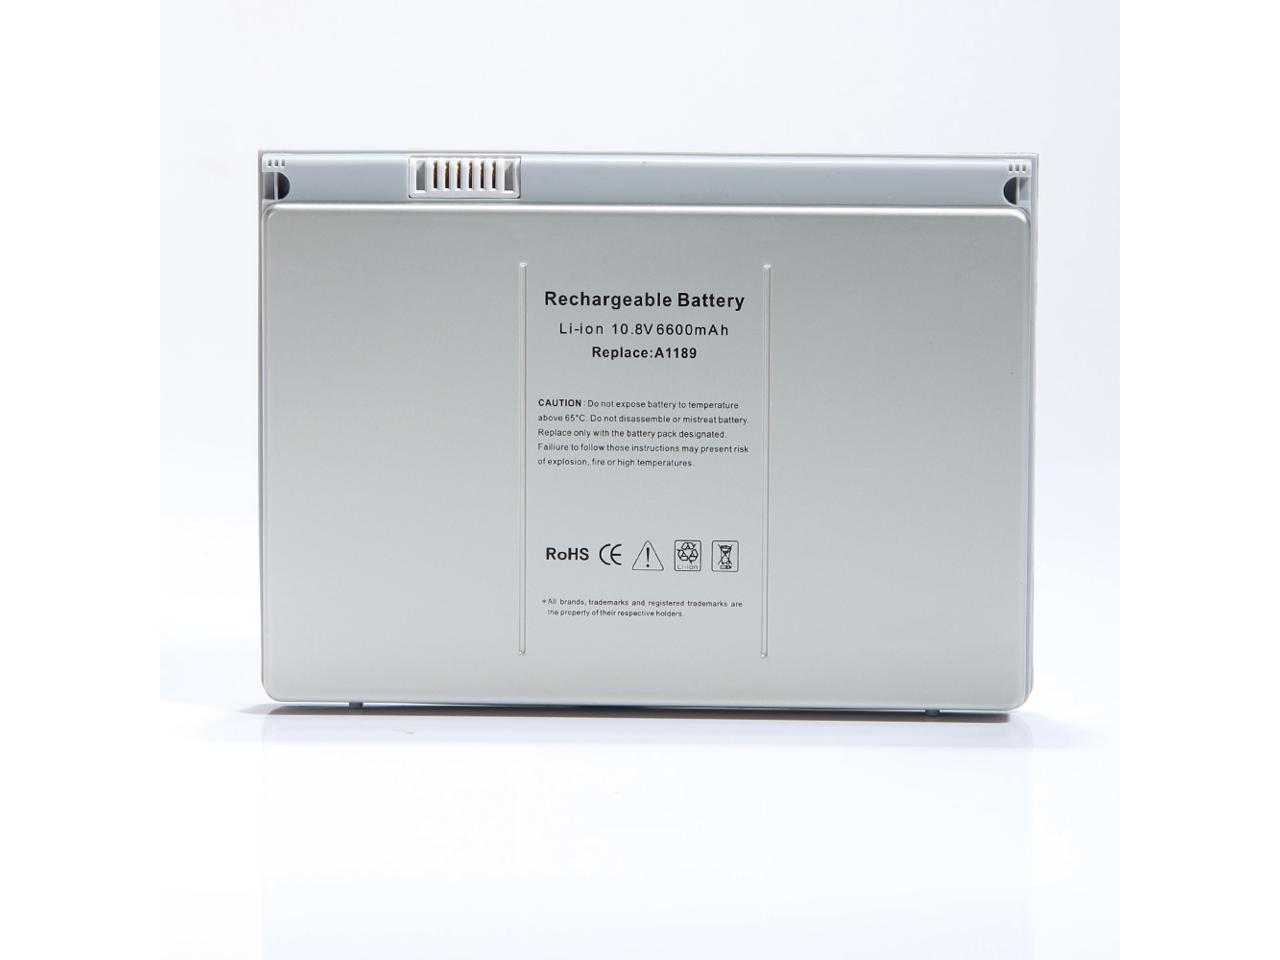 2006 macbook pro battery replacement